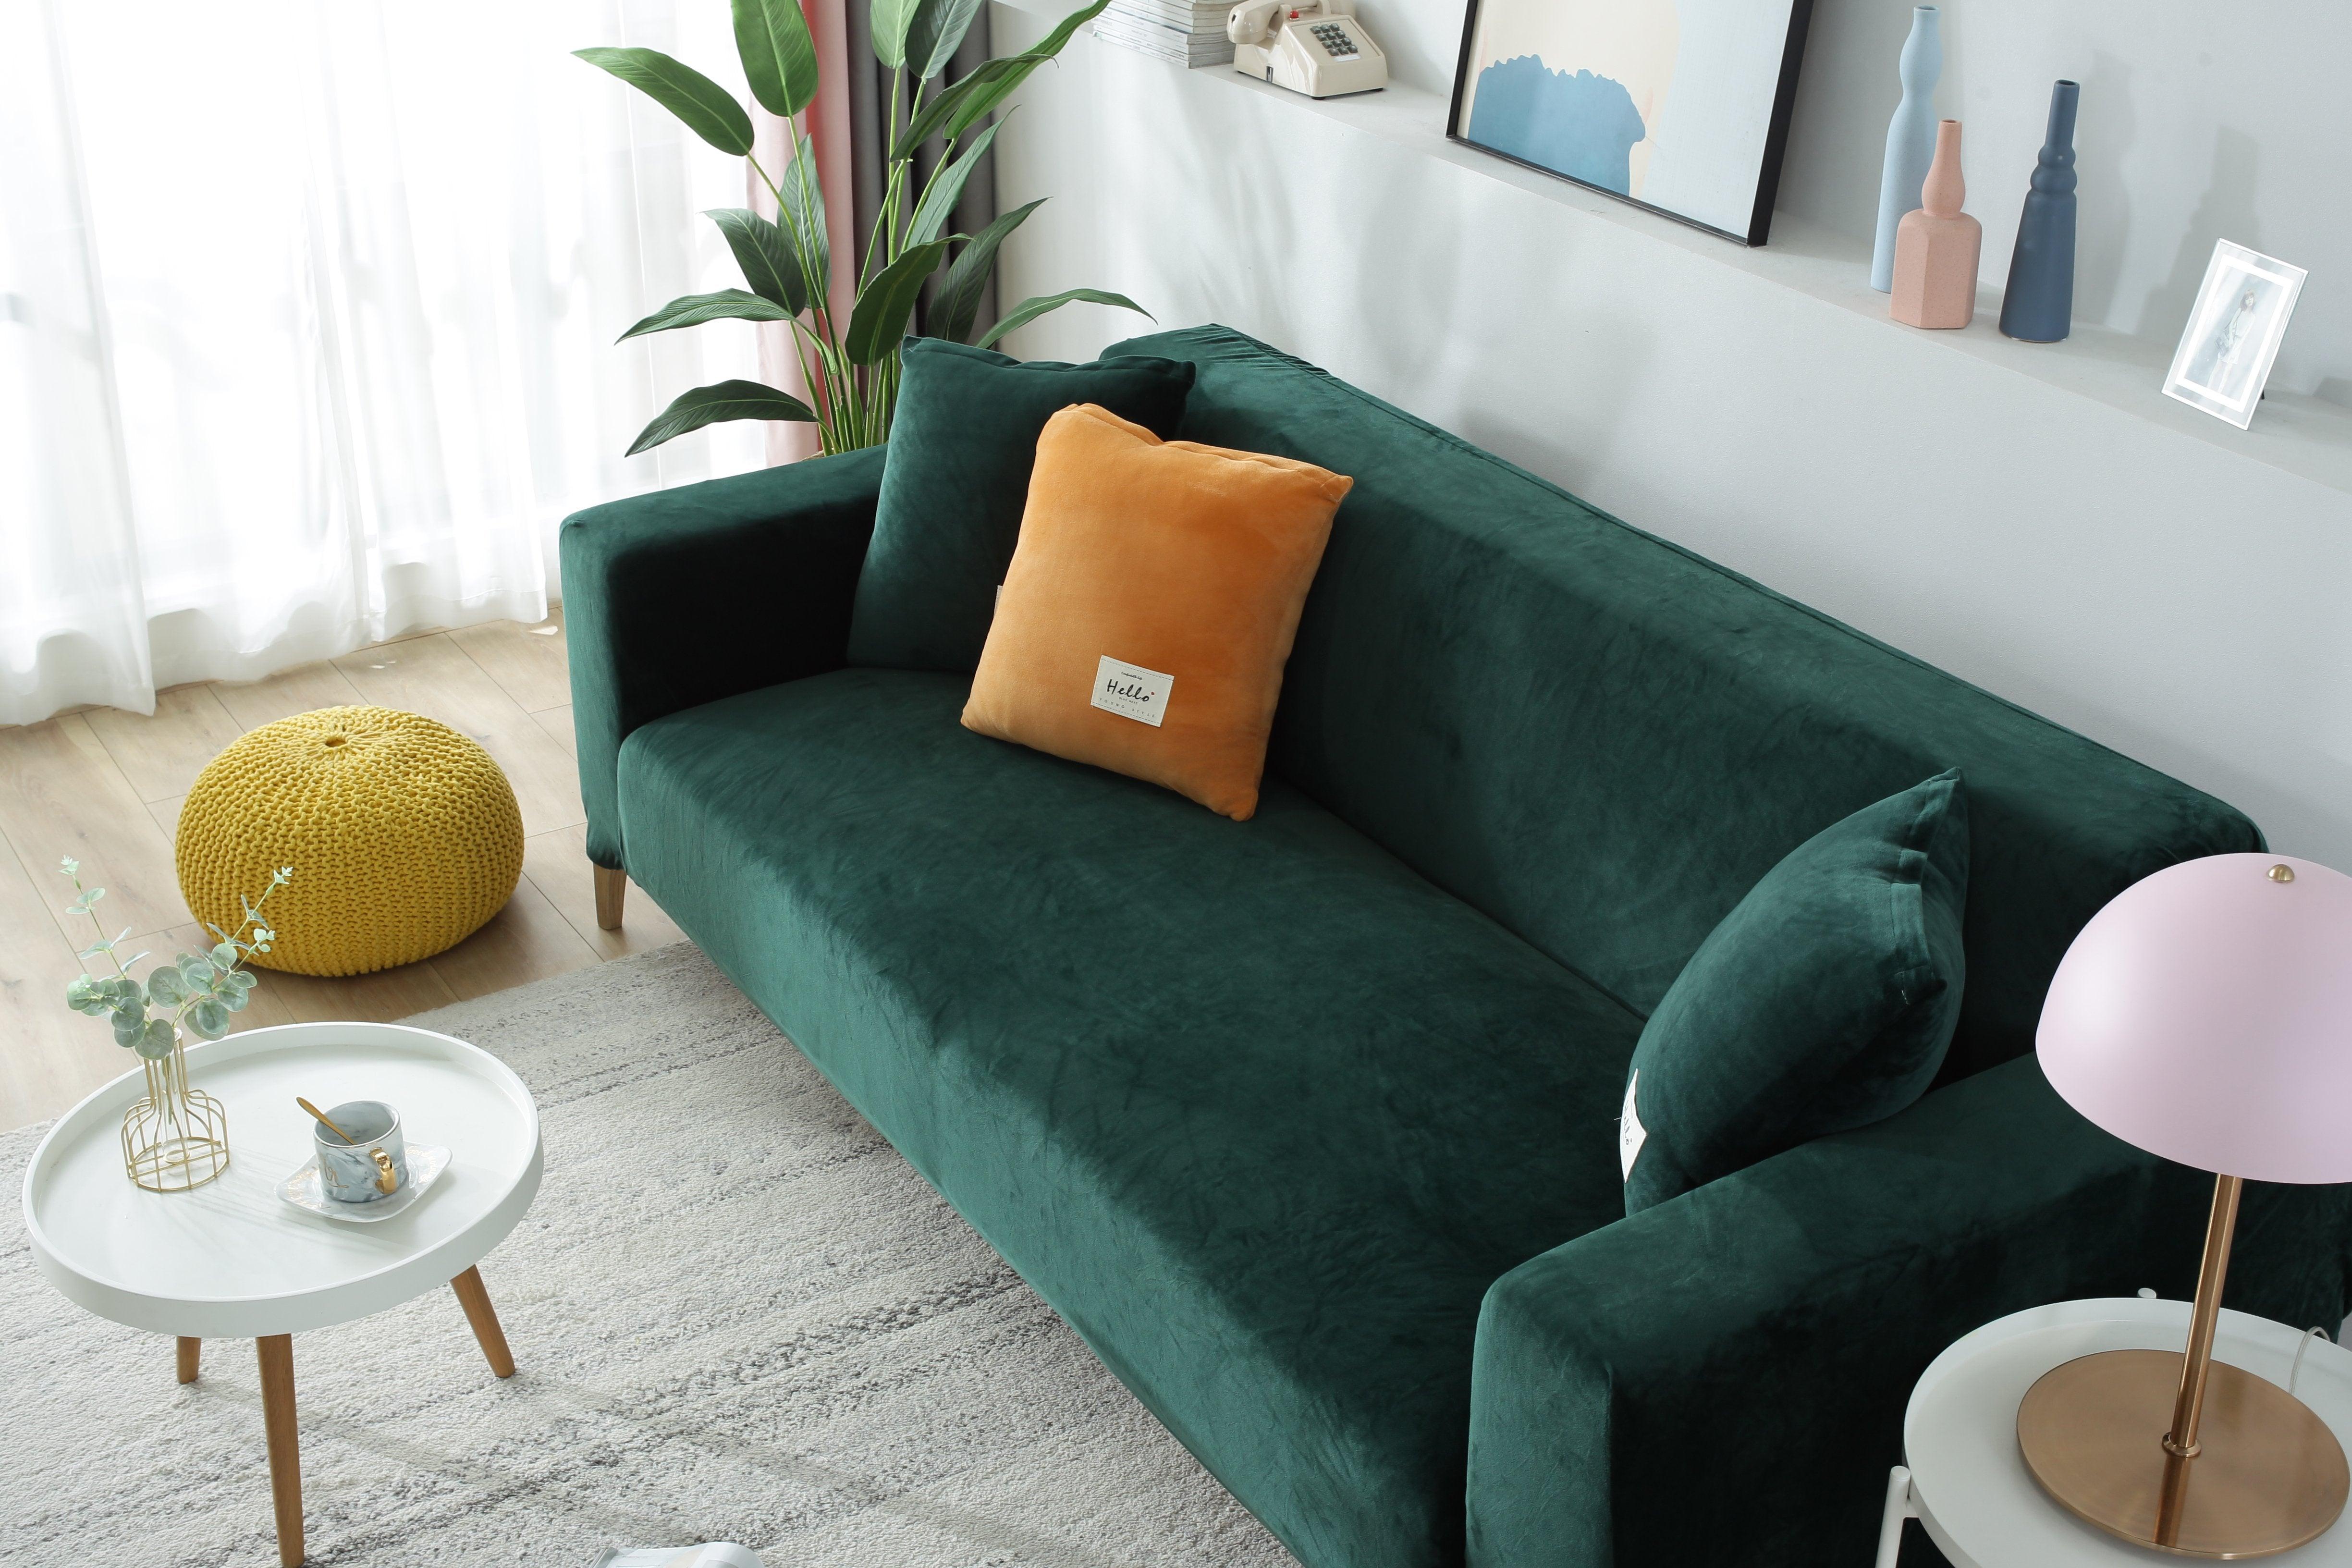 Sofa Cover - Velvet - Dark Green - Adaptable & Expandable - The Sofa Cover Crafter